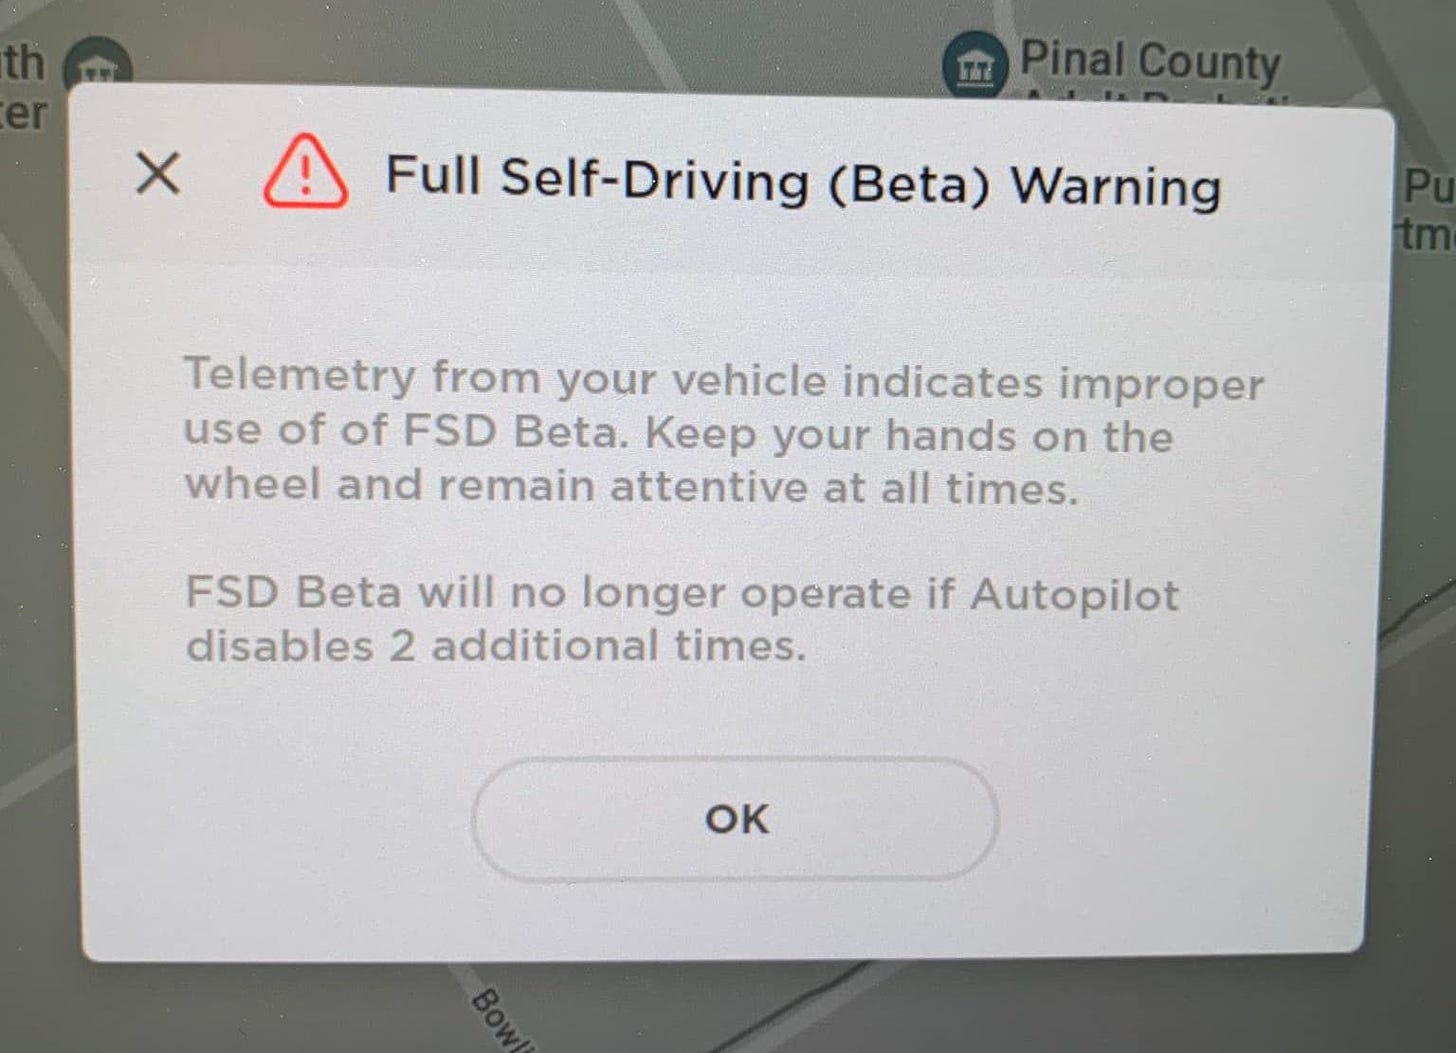 An example warning message issued to a beta tester who did not pay sufficient attention while using the beta software